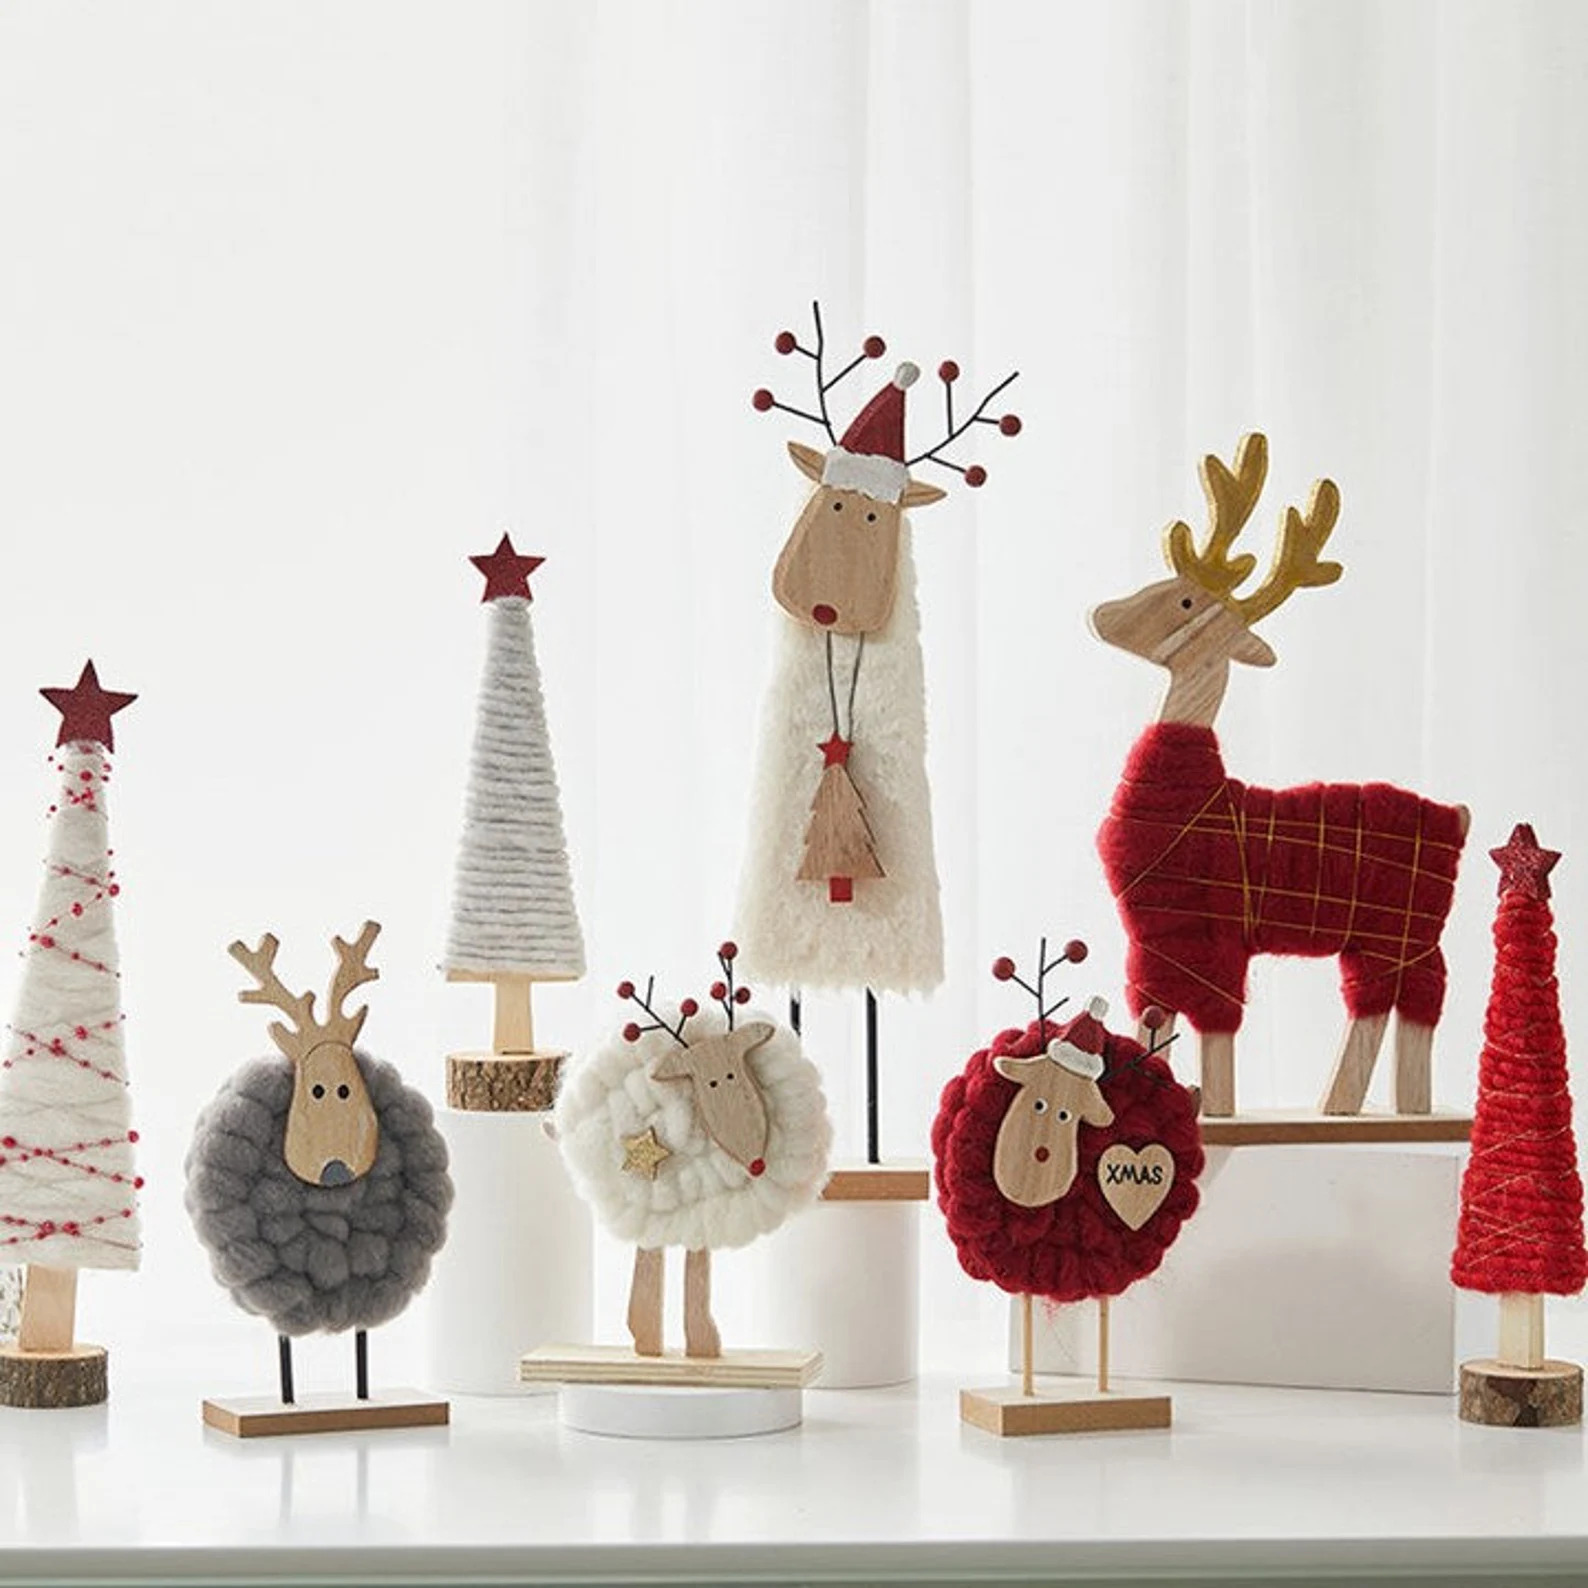 17 Last-Minute Christmas Decoration Ideas That Are Incredibly Cute